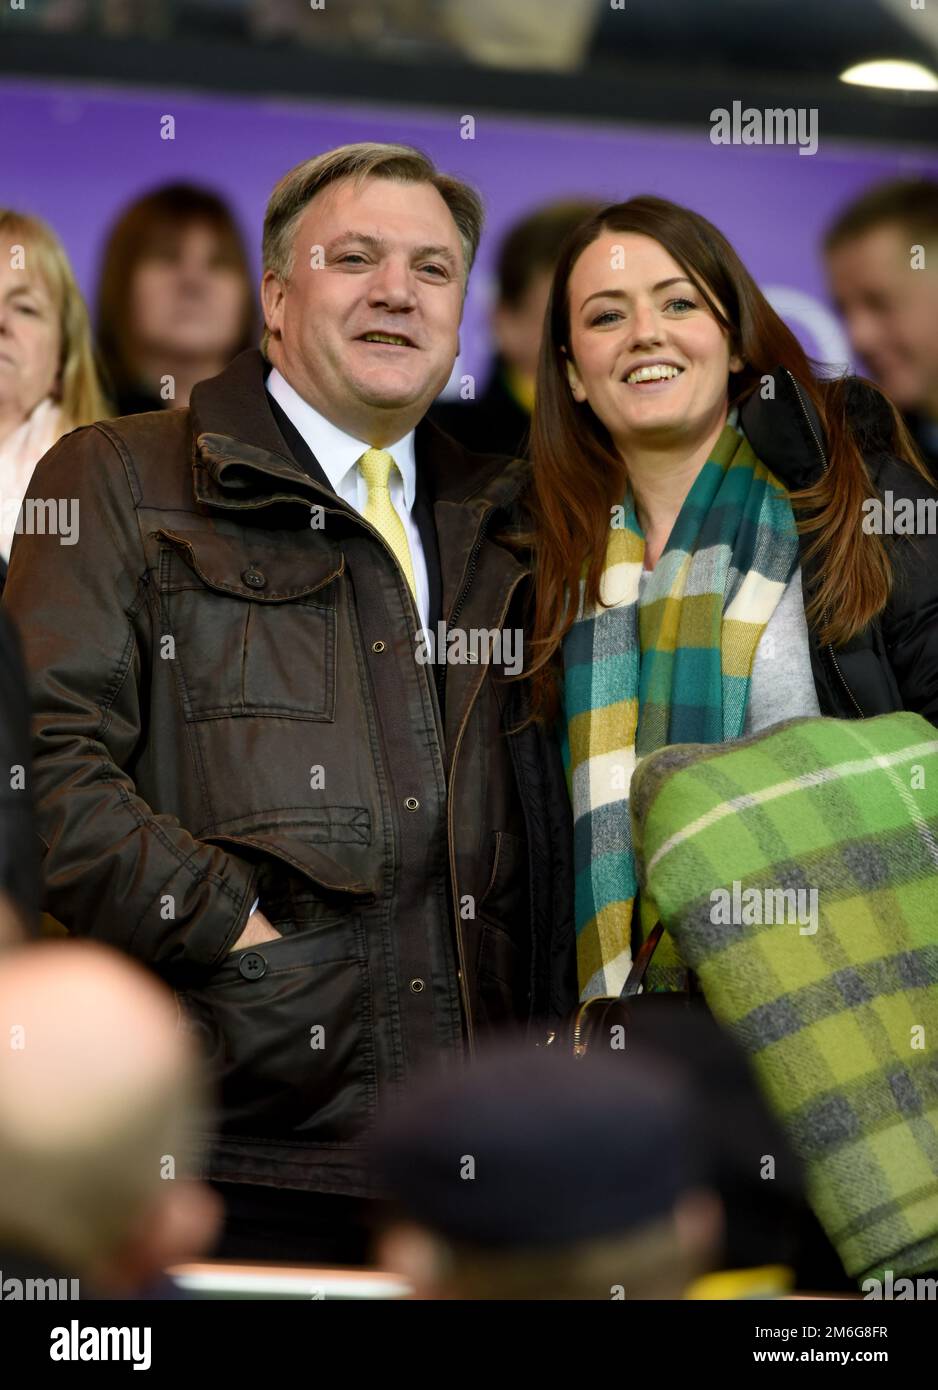 Norwich City director Ed Balls back in the directors box at Carrow Rd after his exit from Strictly come dancing - Norwich City v Brentford, Sky Bet Championship, Carrow Road, Norwich - 3rd December 2016. Stock Photo